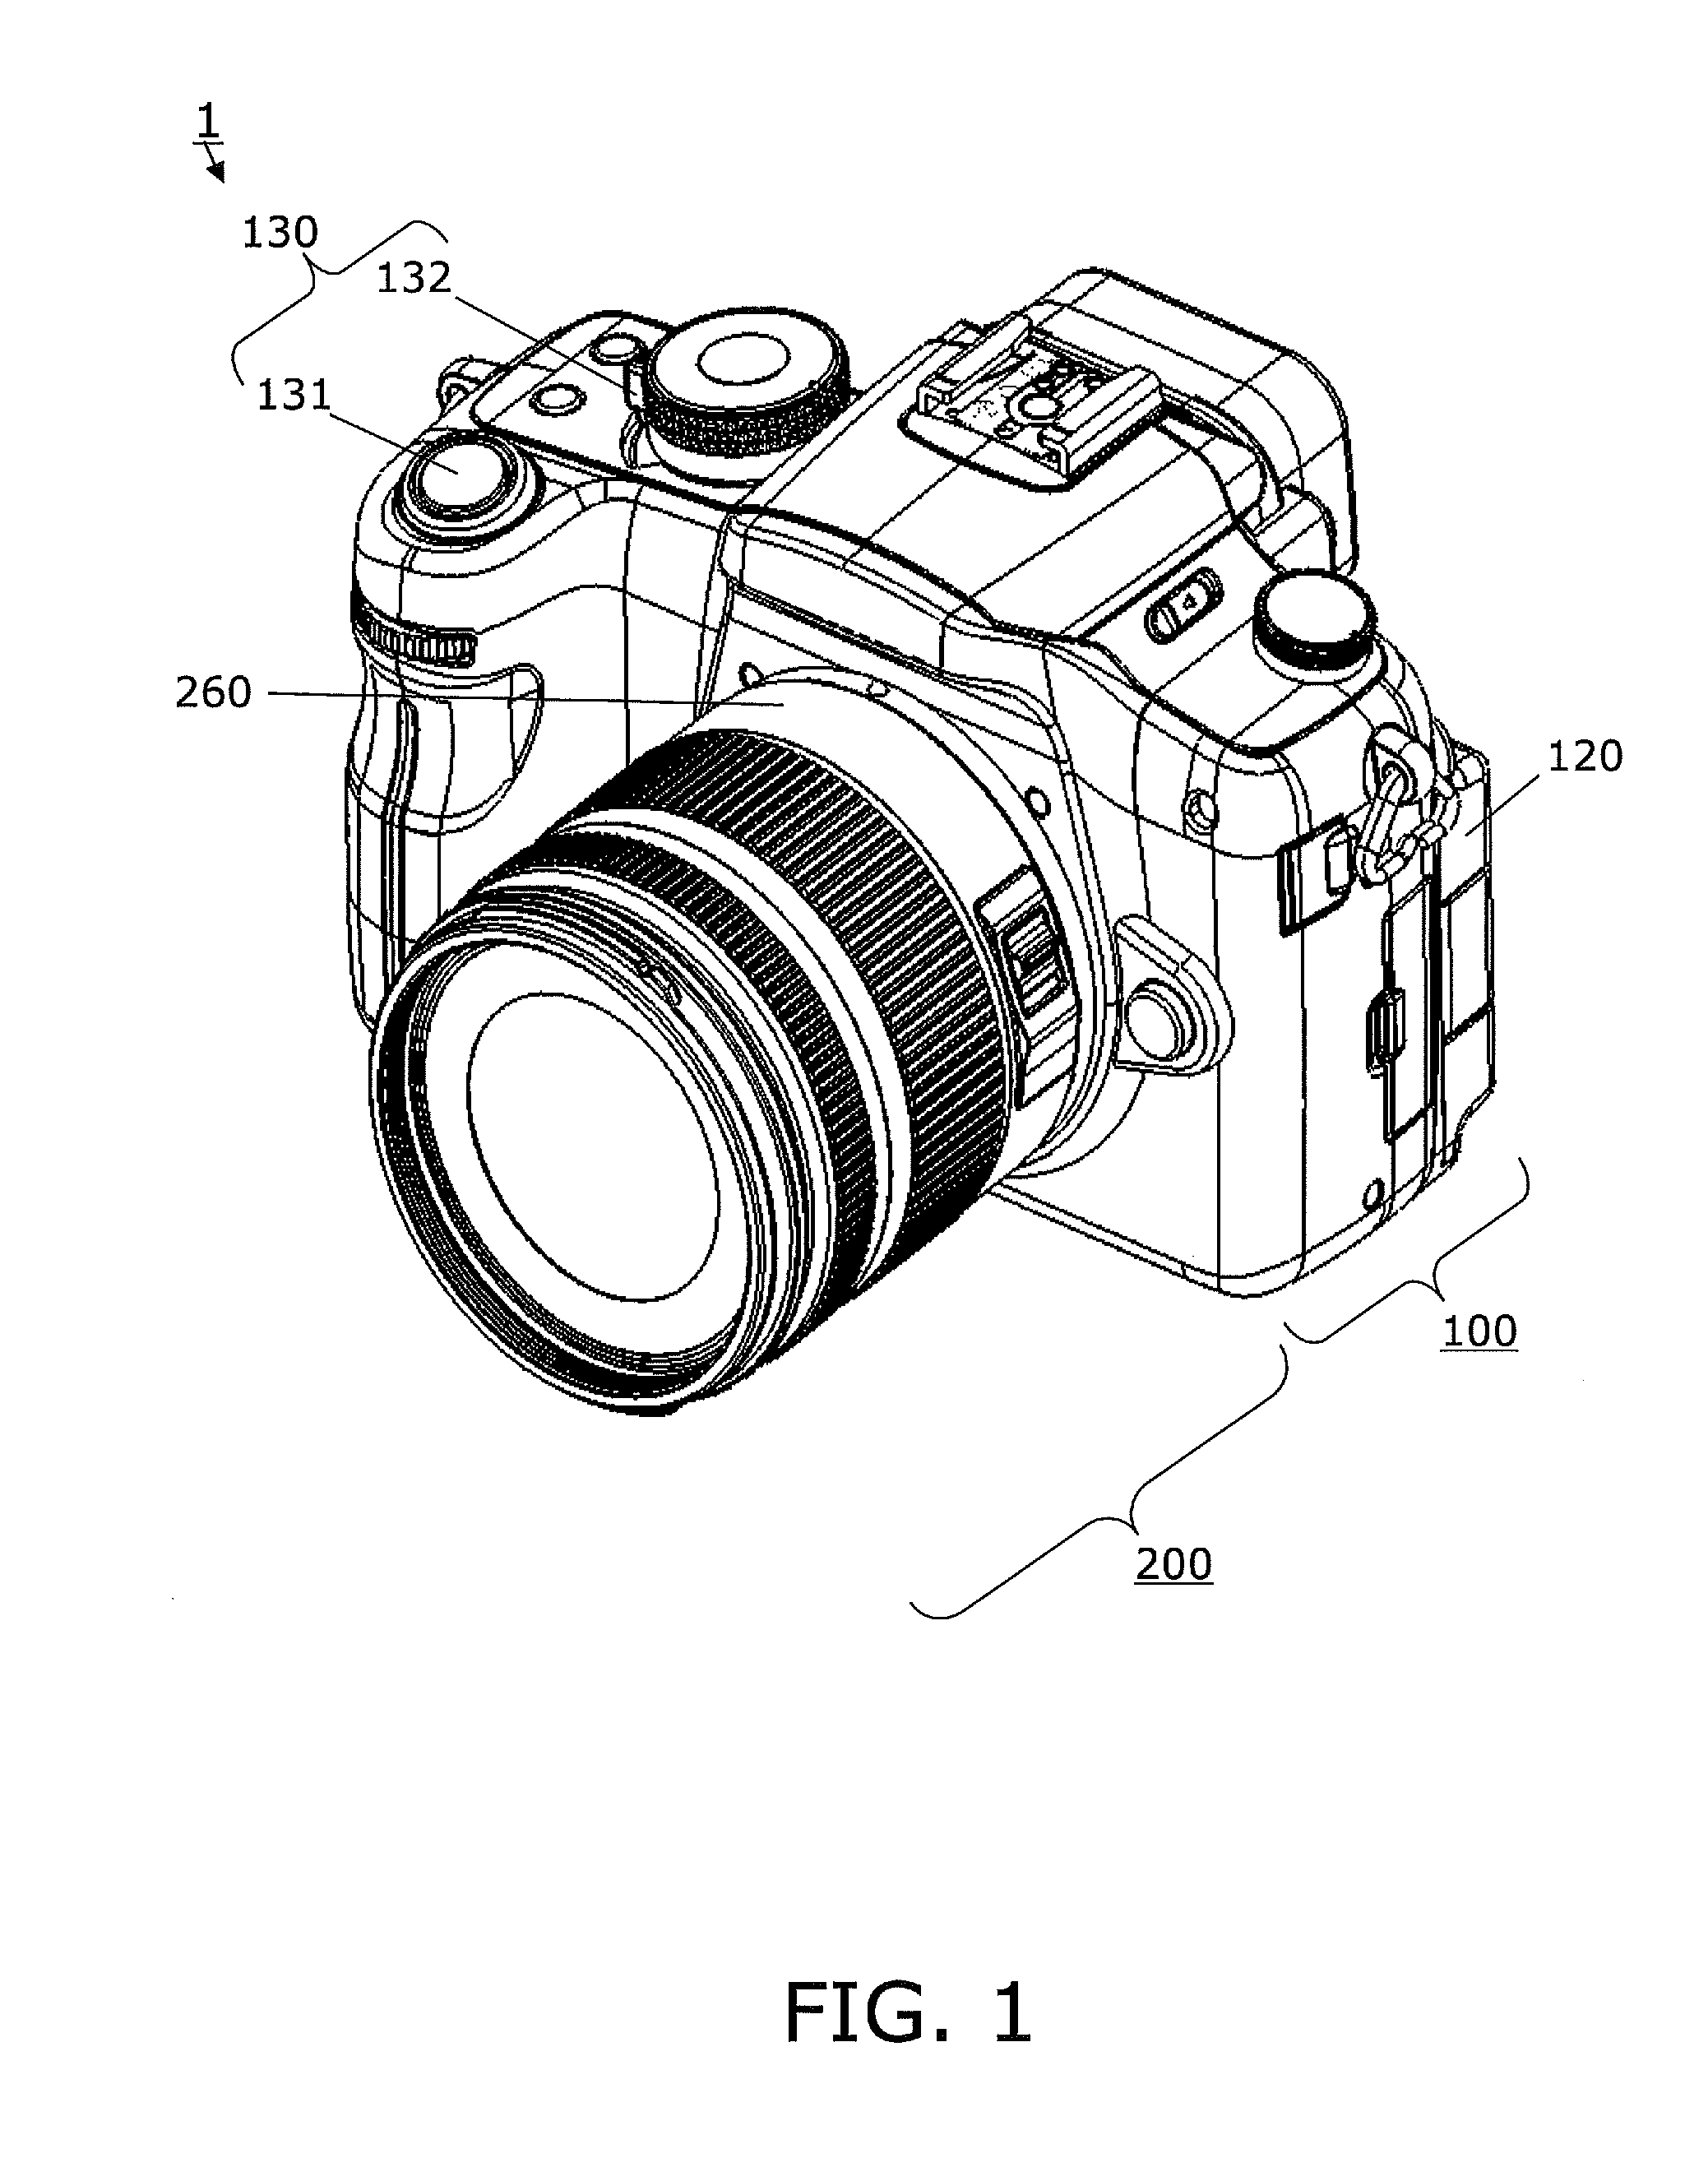 Focal plane shutter device and imaging device